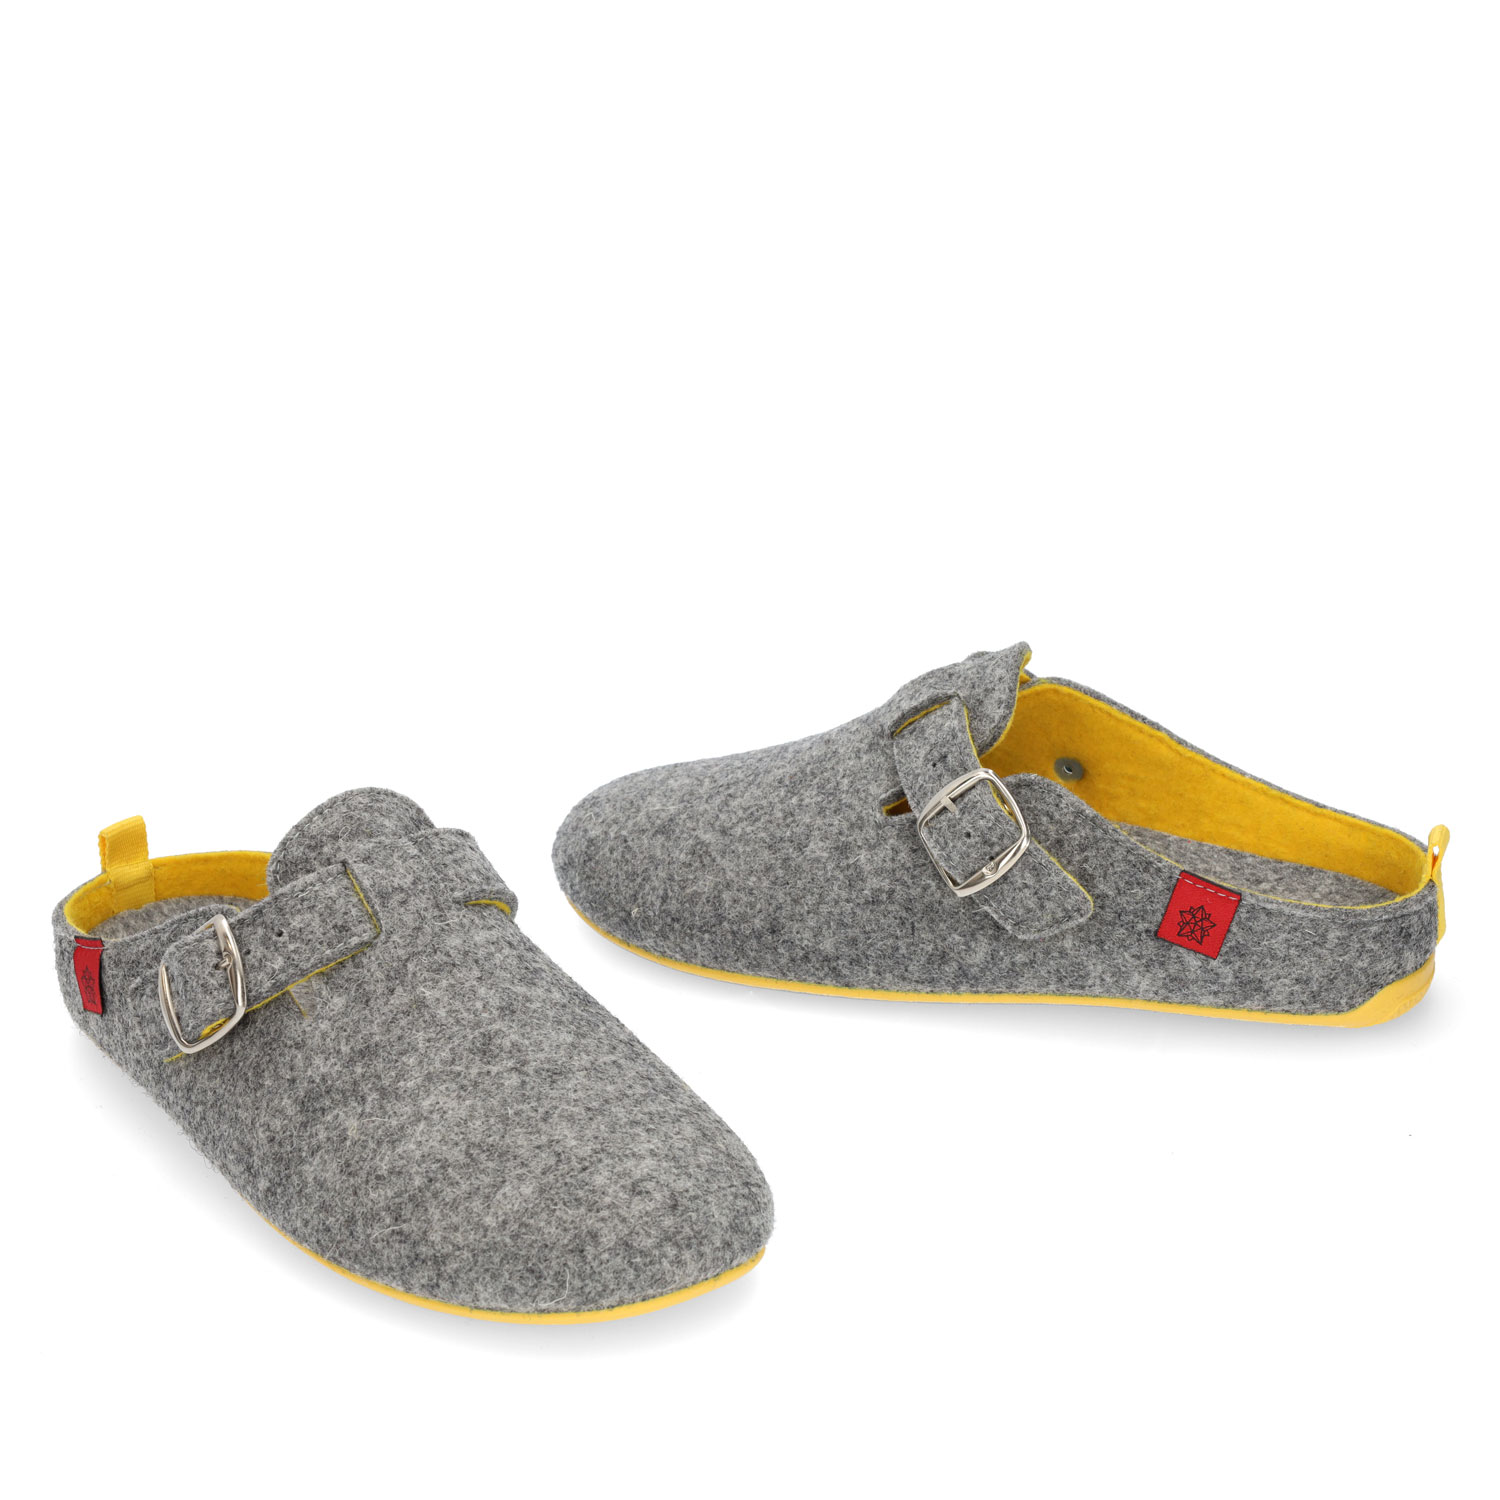 Unisex home slippers in grey felt and buckle detail 